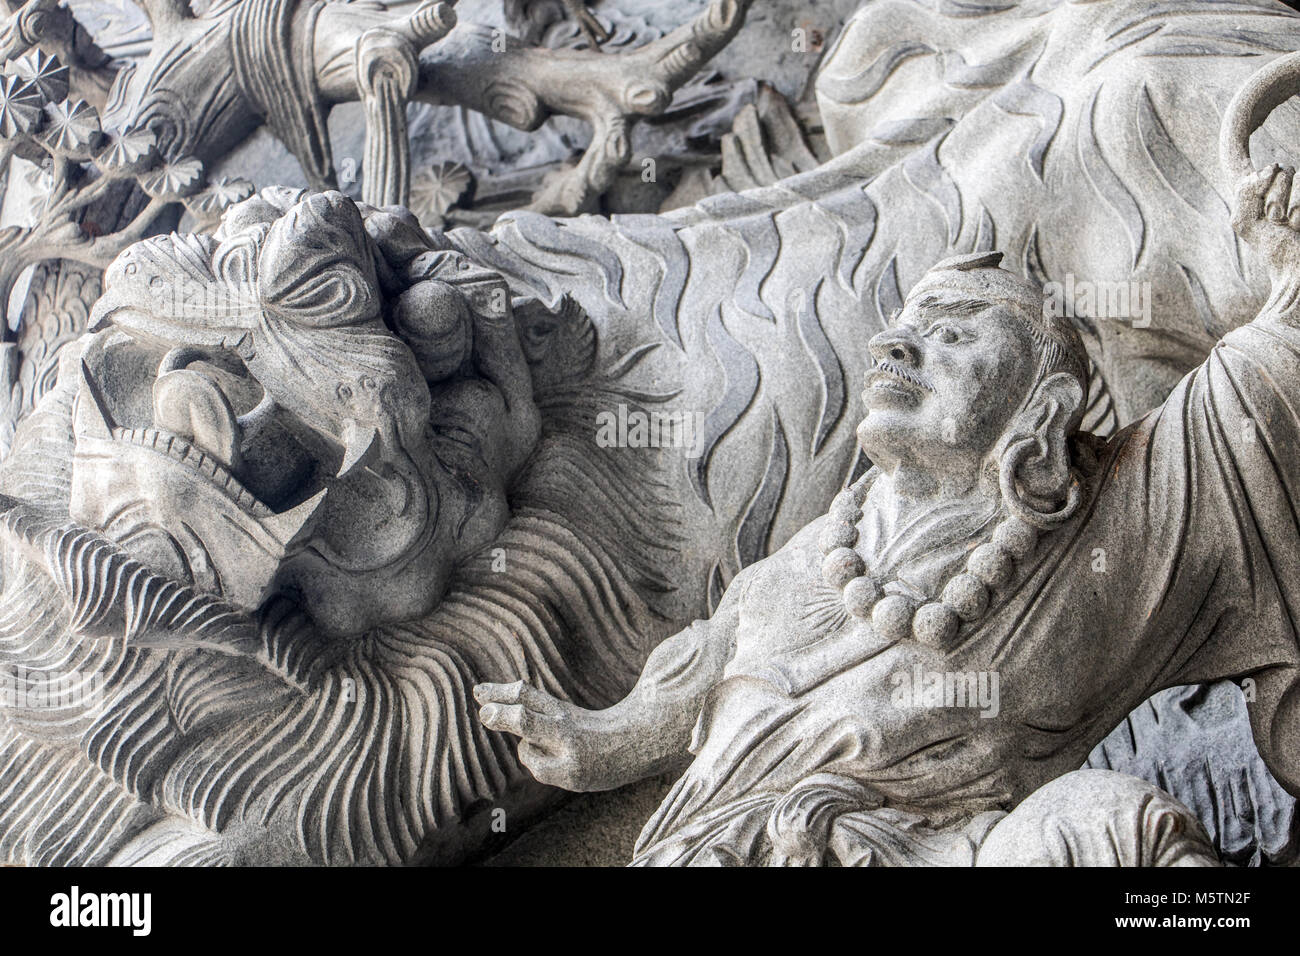 The mythology scene with stone tiger as a decoration on the facade of the Chinese monastery. Stock Photo